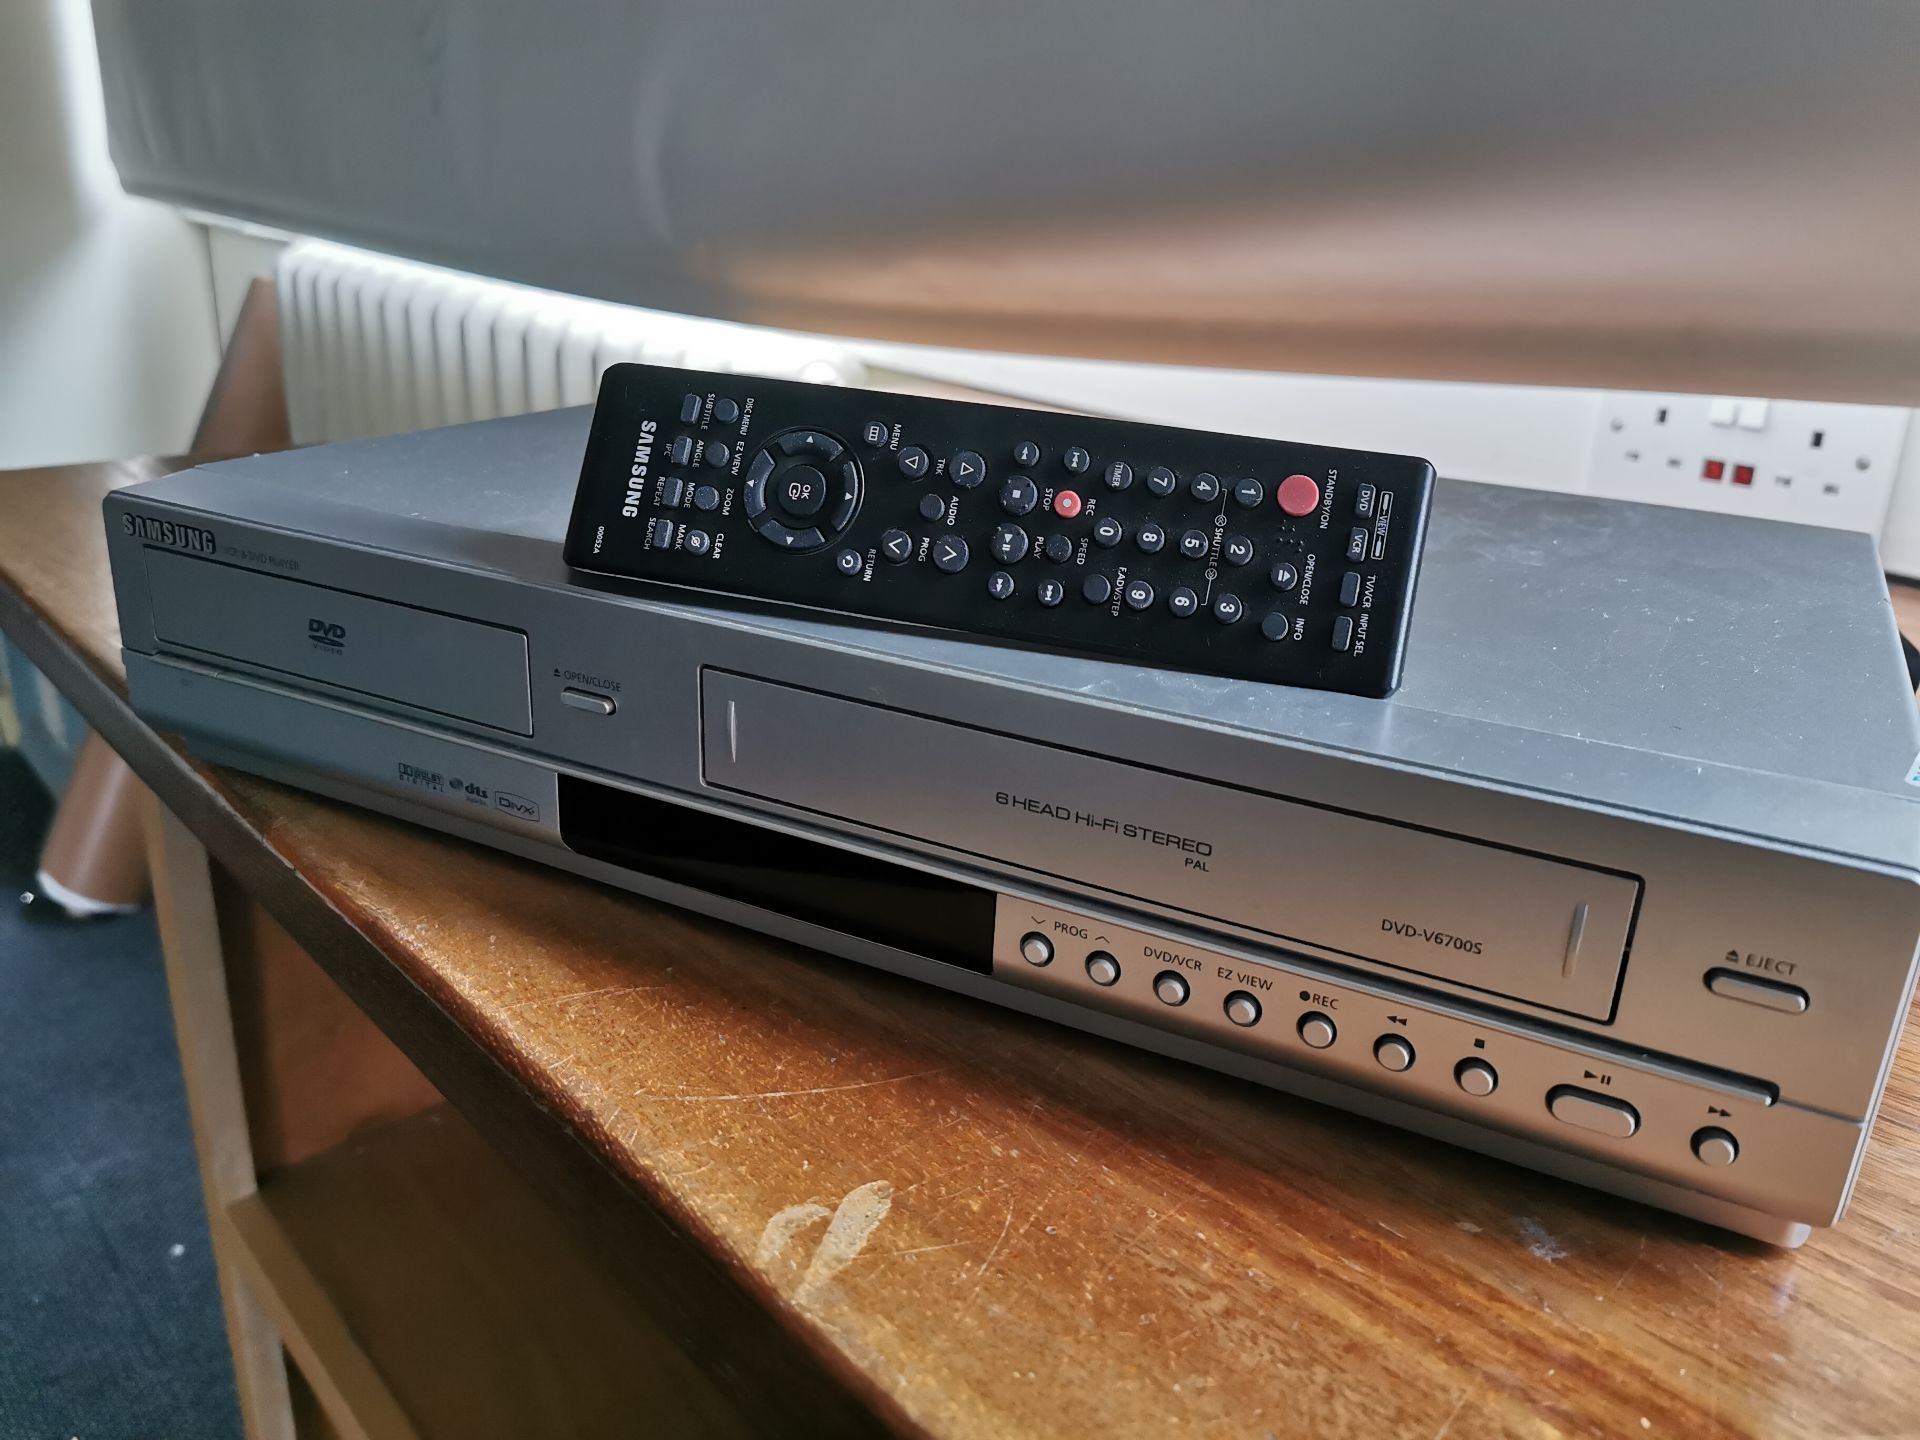 Samsung DVD and video player